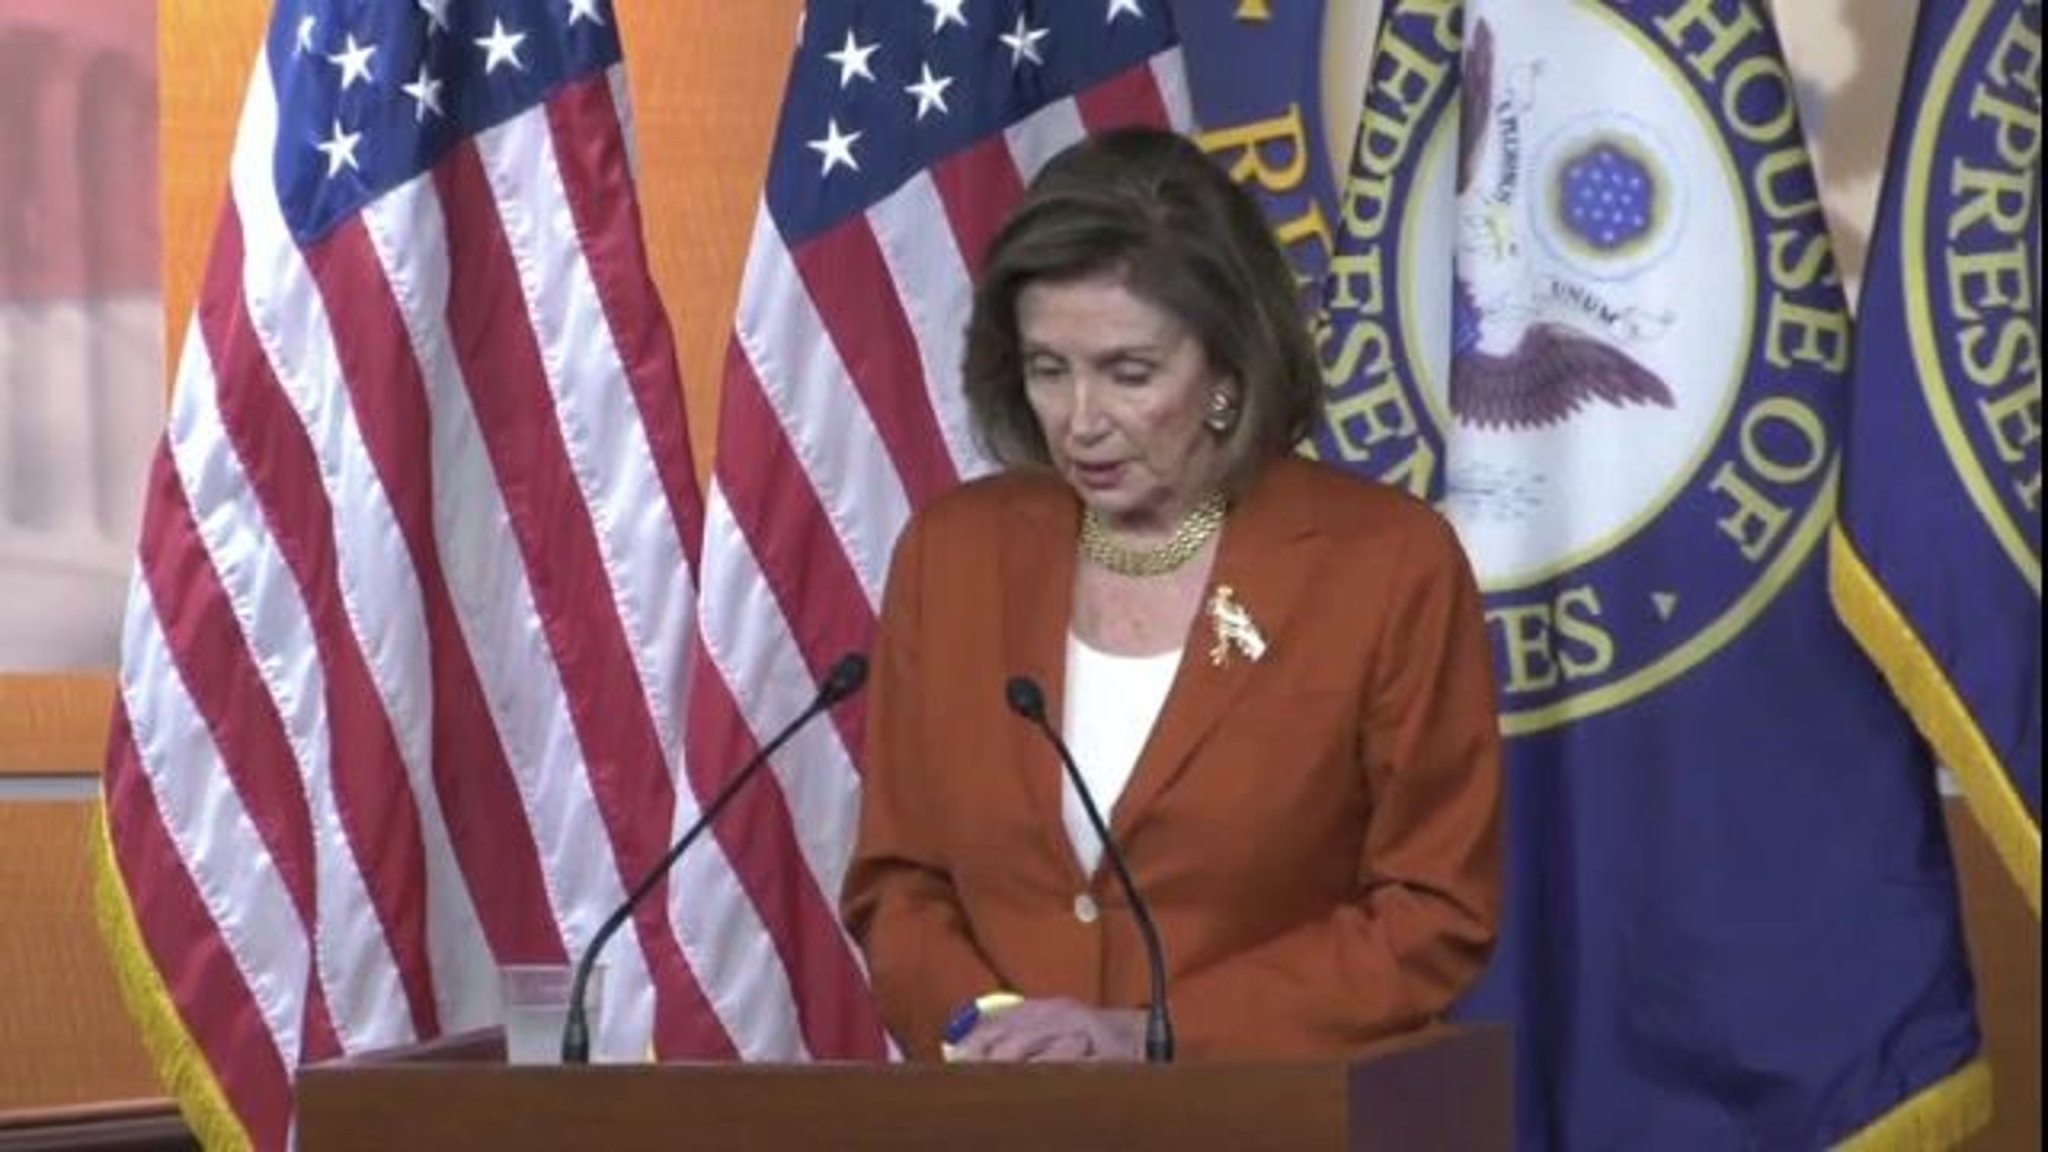 House Speaker Nancy Pelosi on SCOTUS overturning Roe v. Wade: "The Republicans are planning a nationwide abortion ban."